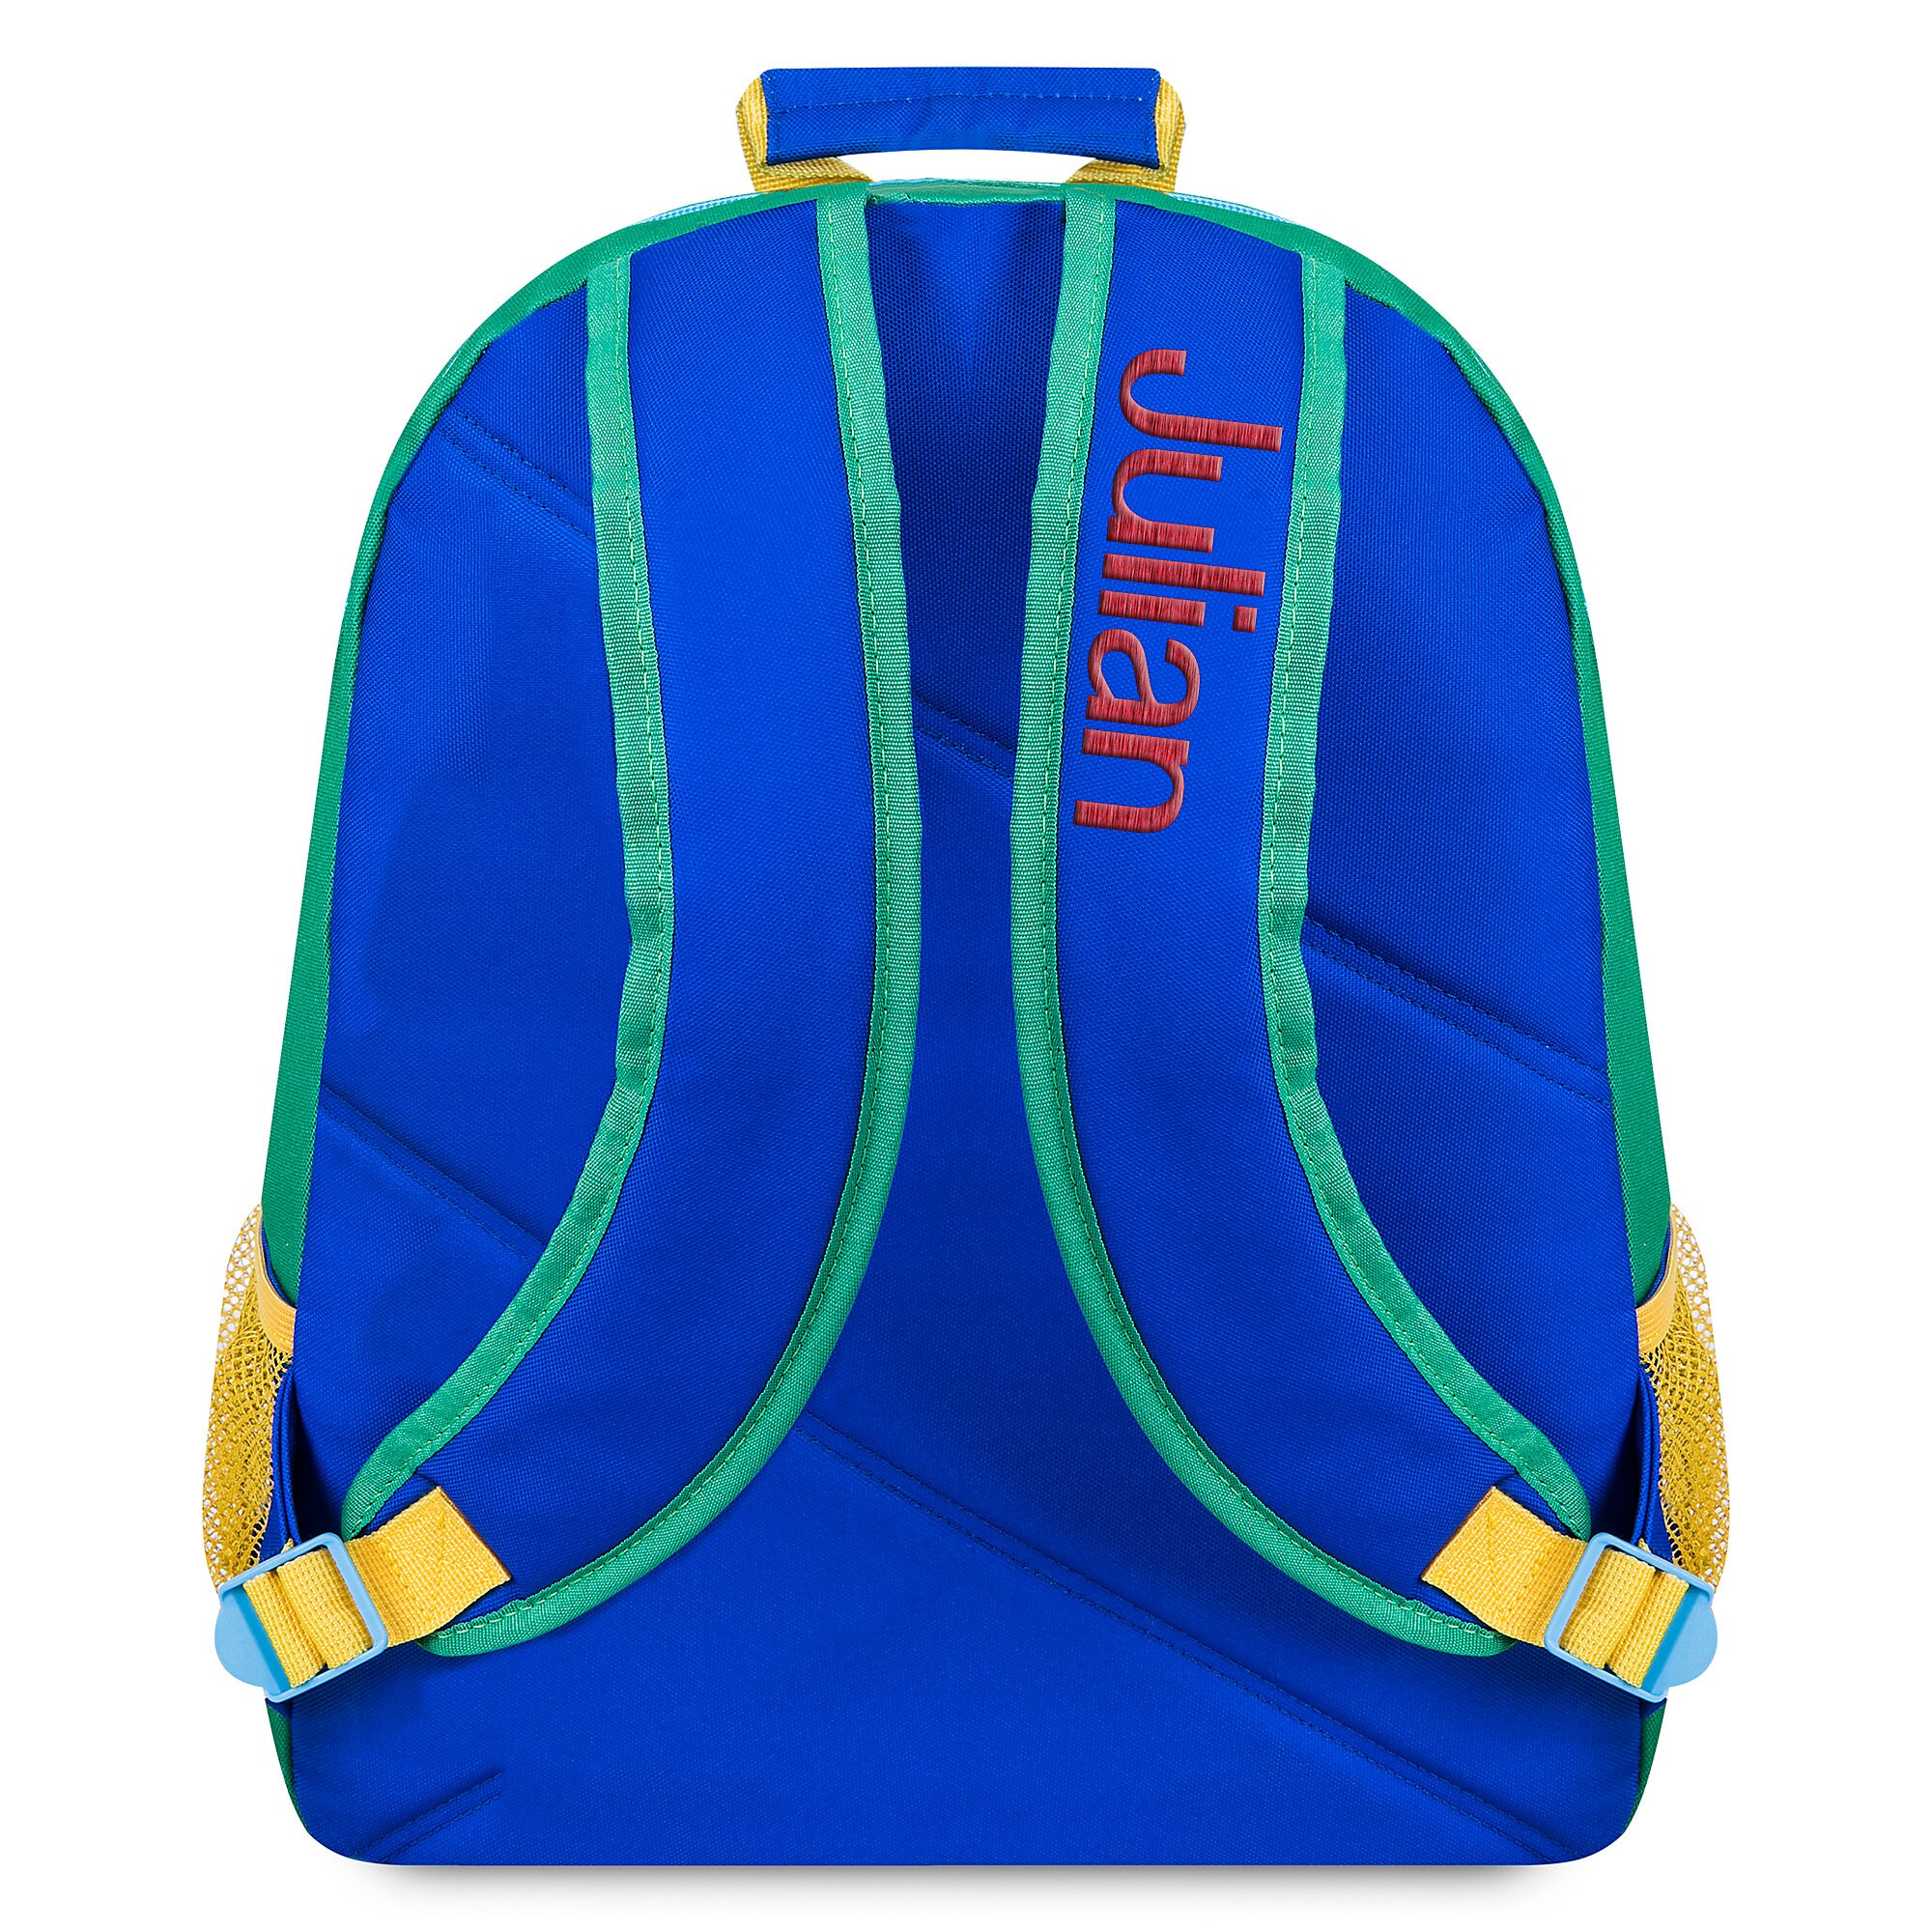 Toy Story 4 Backpack - Personalized